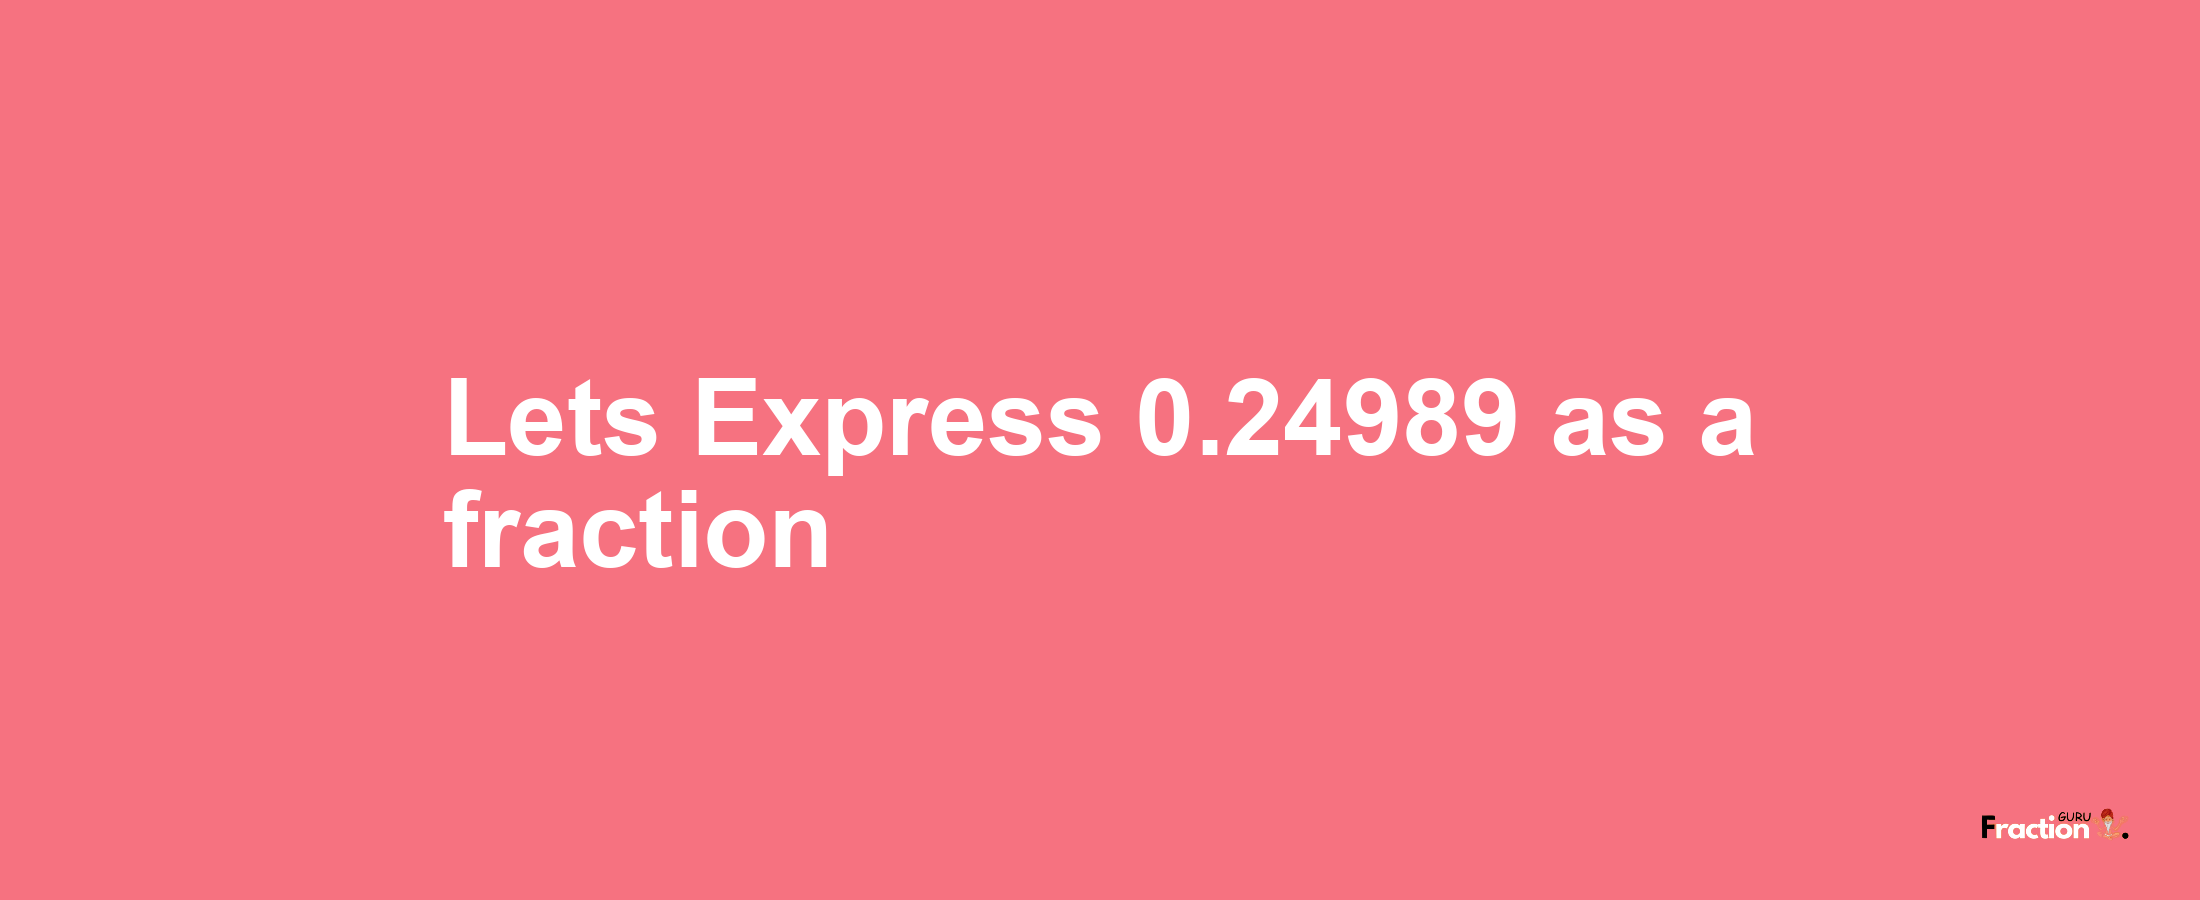 Lets Express 0.24989 as afraction